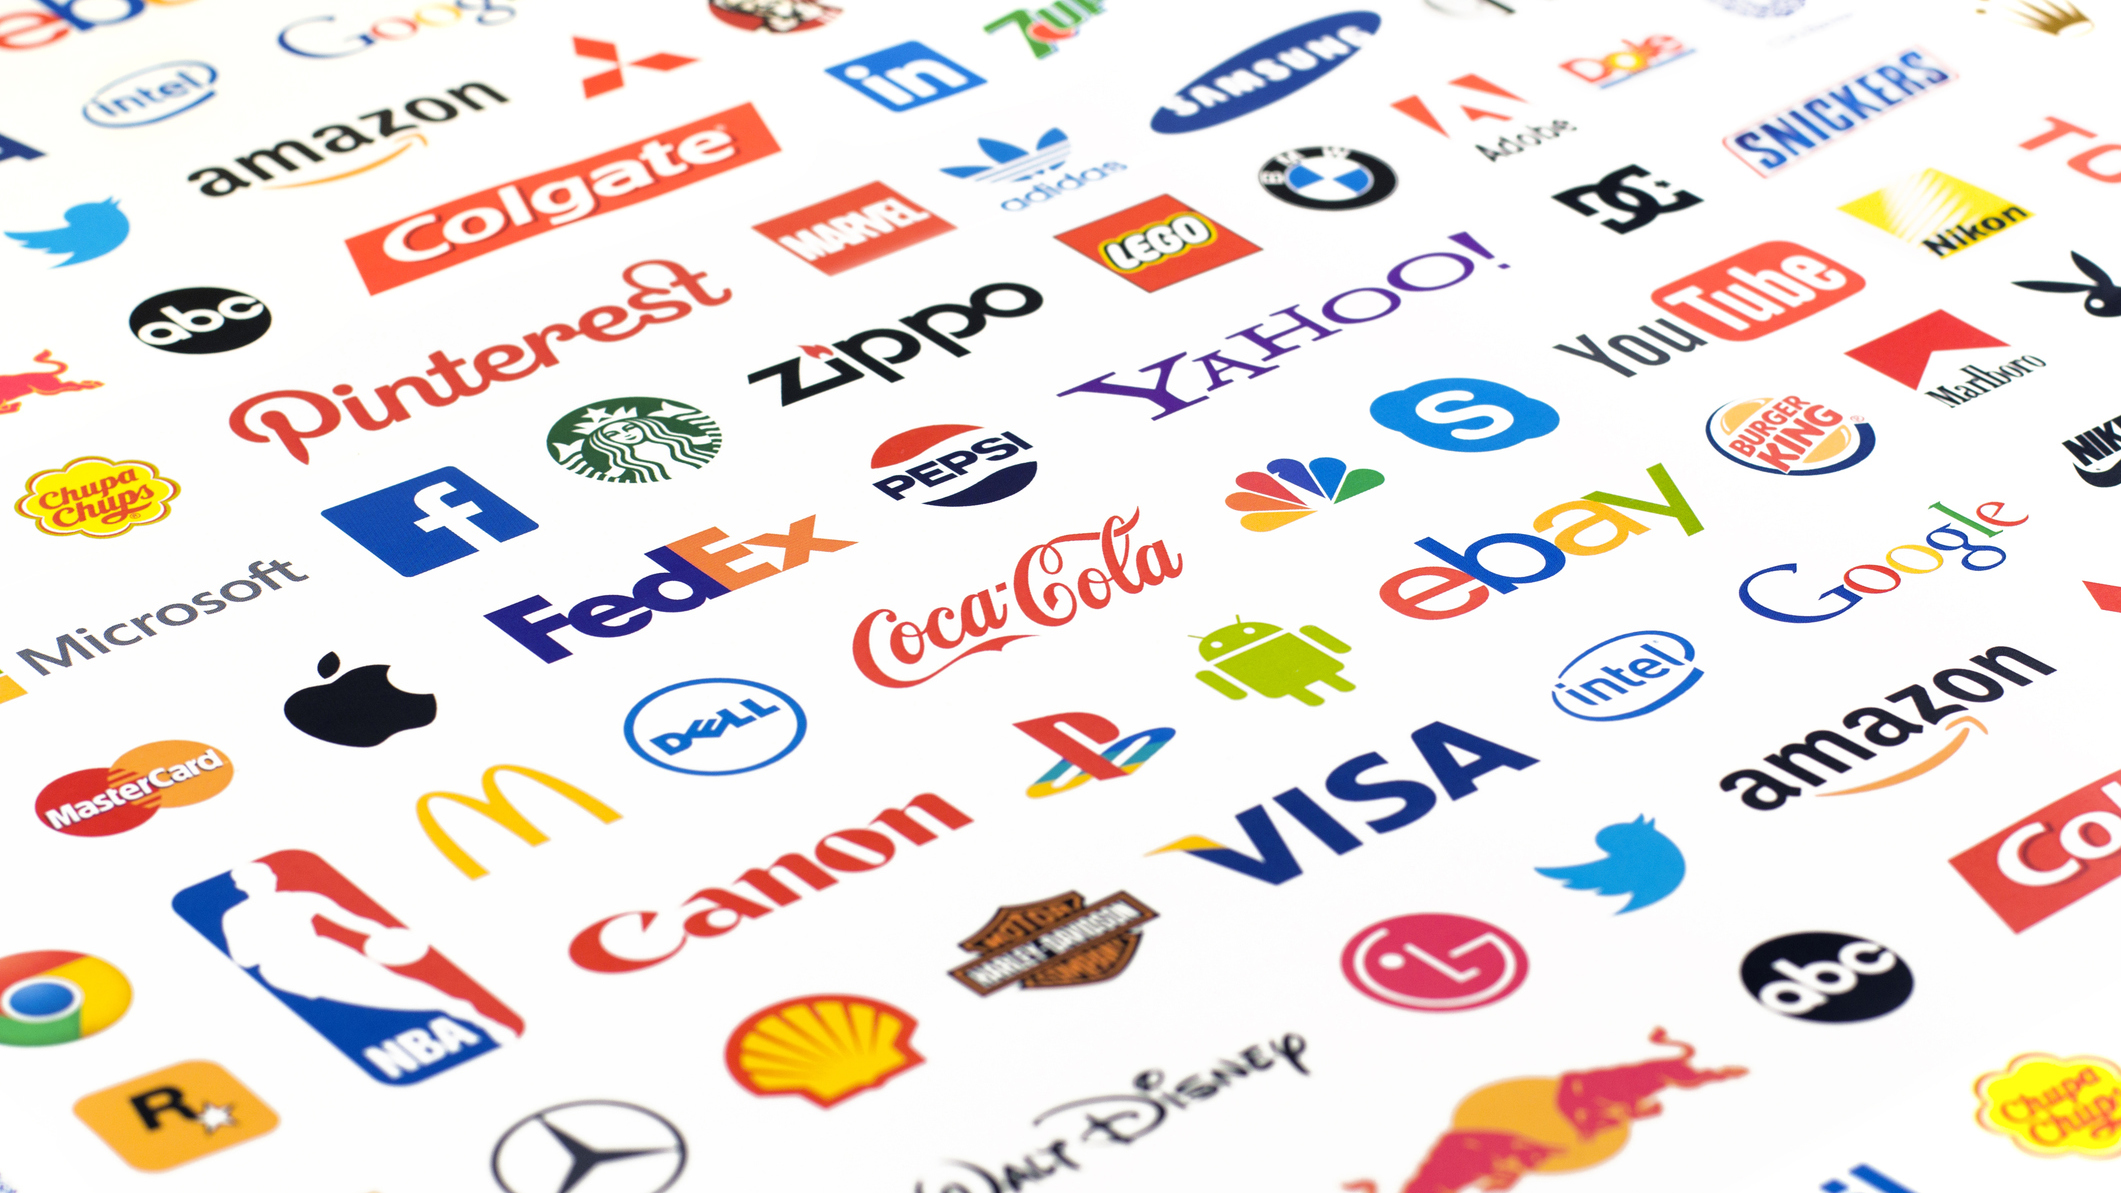 Brand logos in vector format (EPS, AI, CDR, SVG) for free download